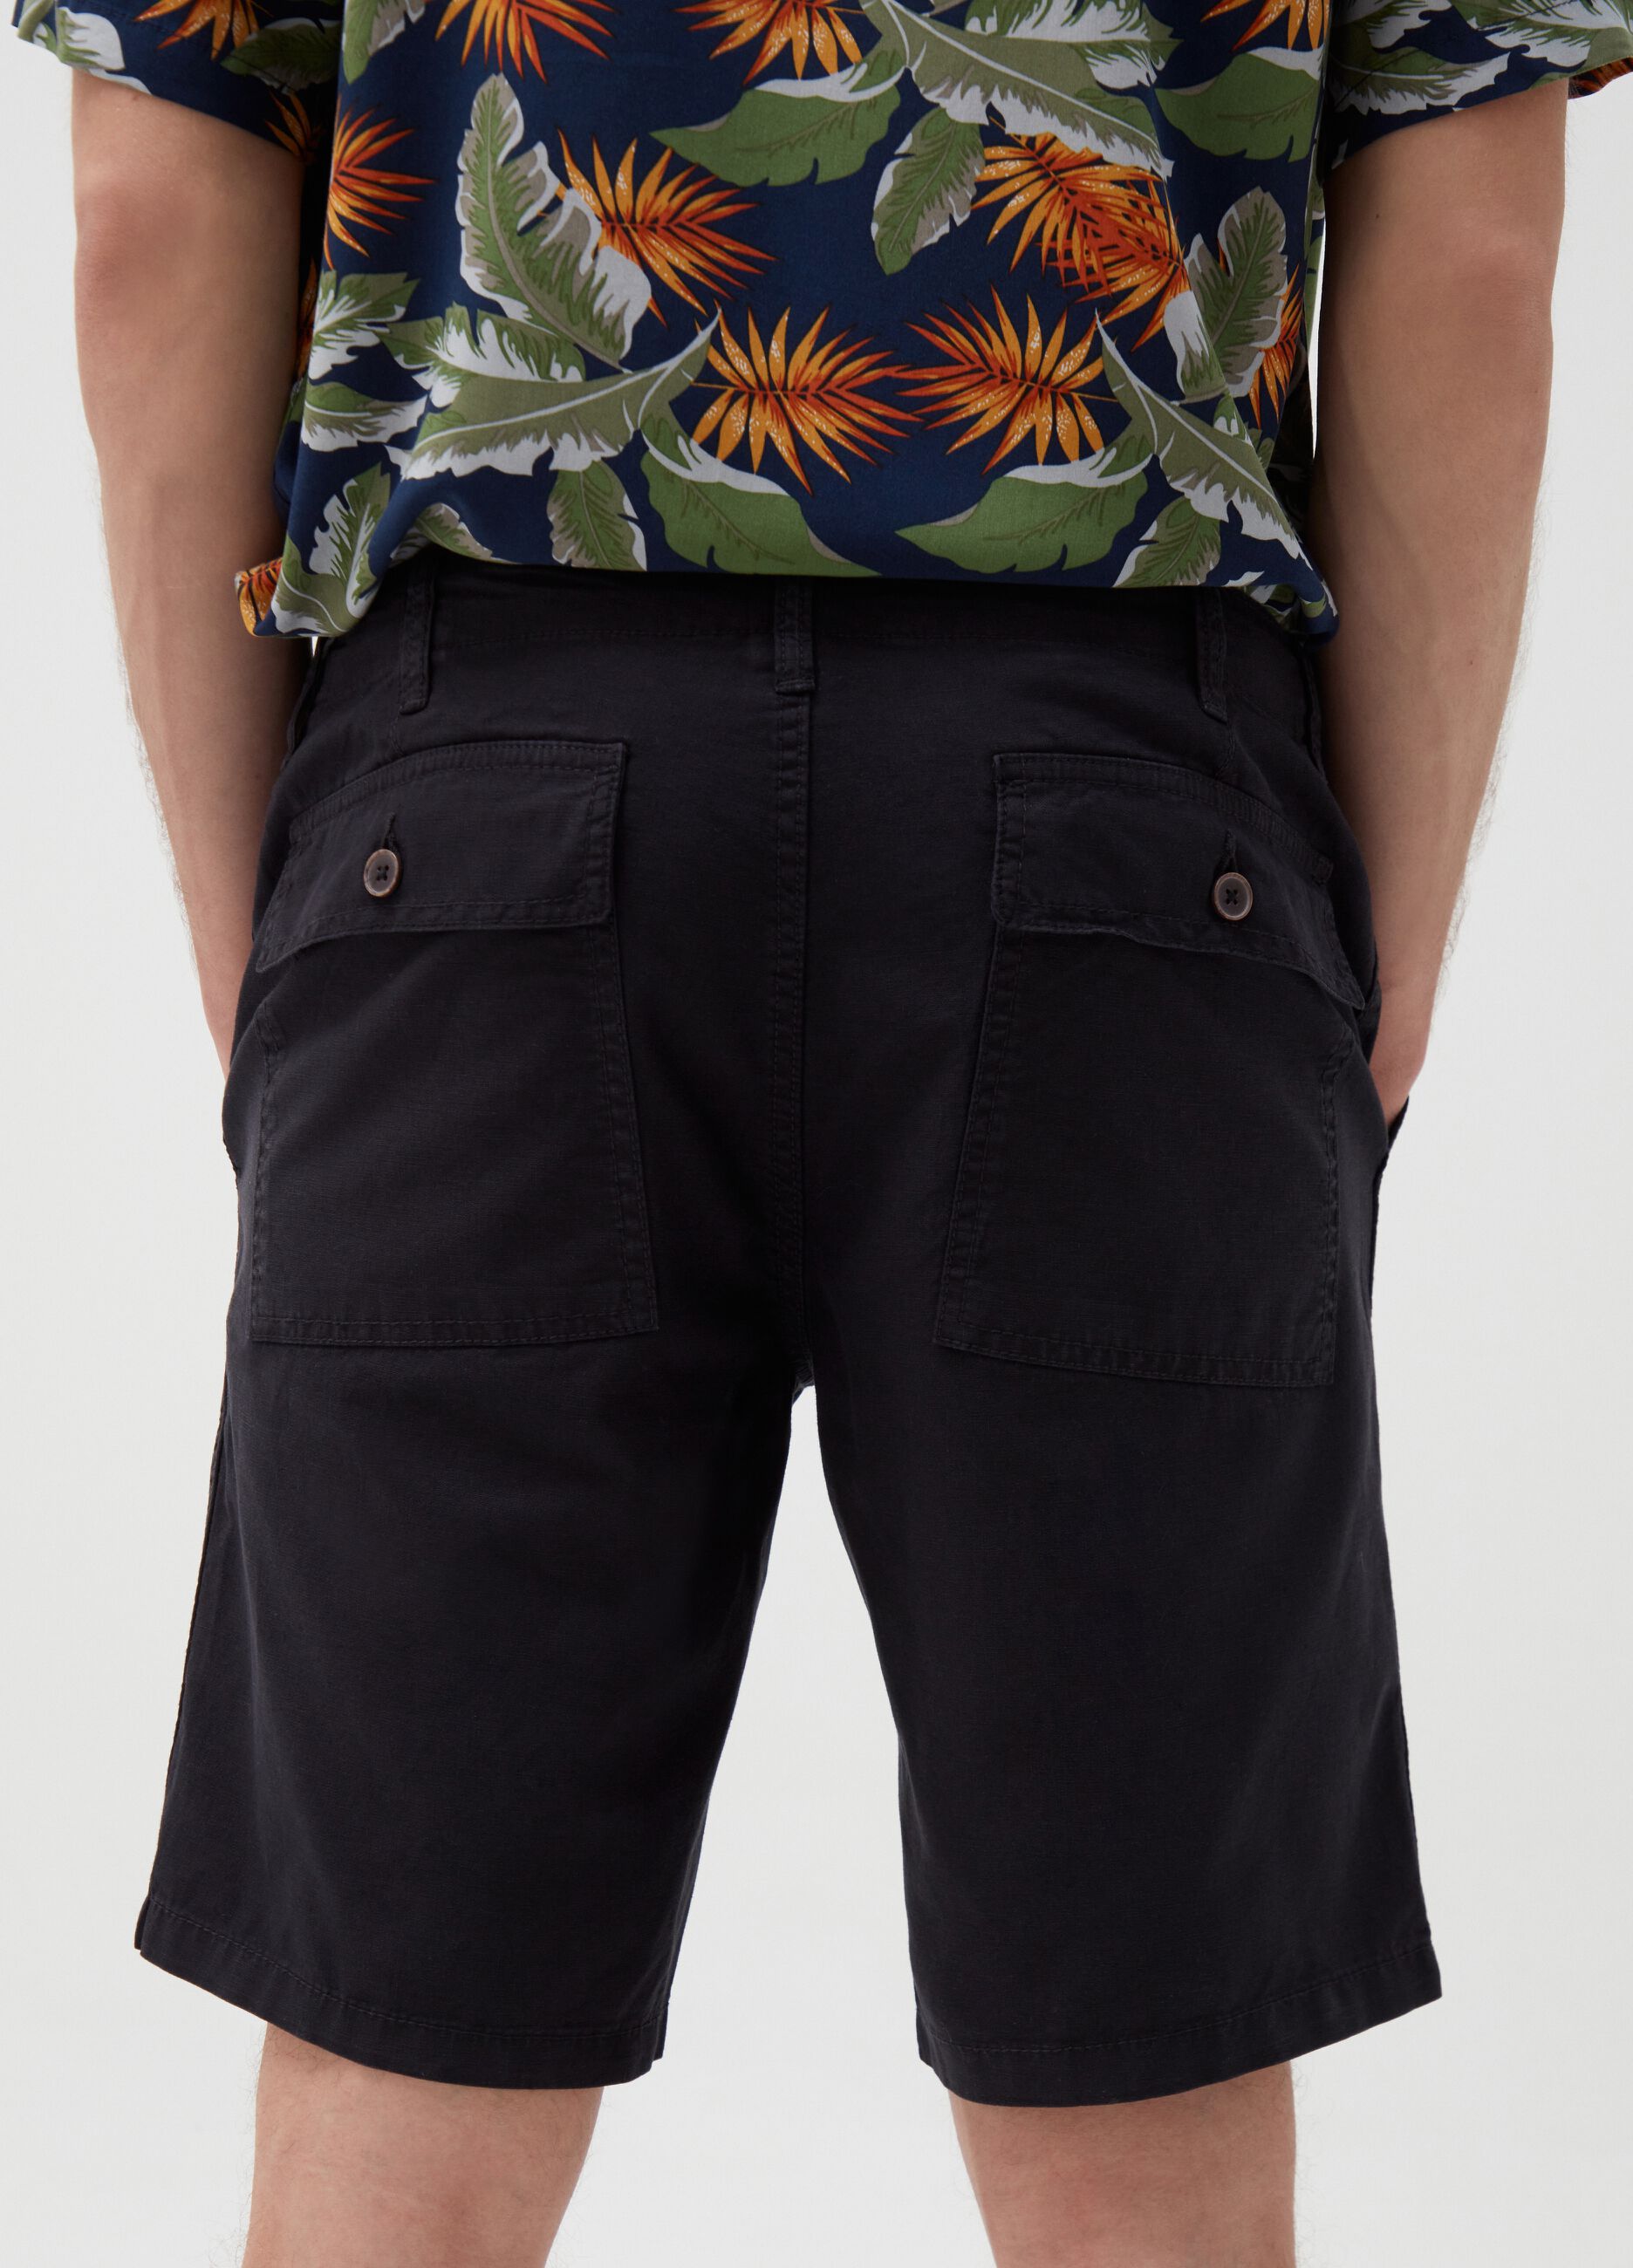 Bermuda shorts in linen and cotton with pockets